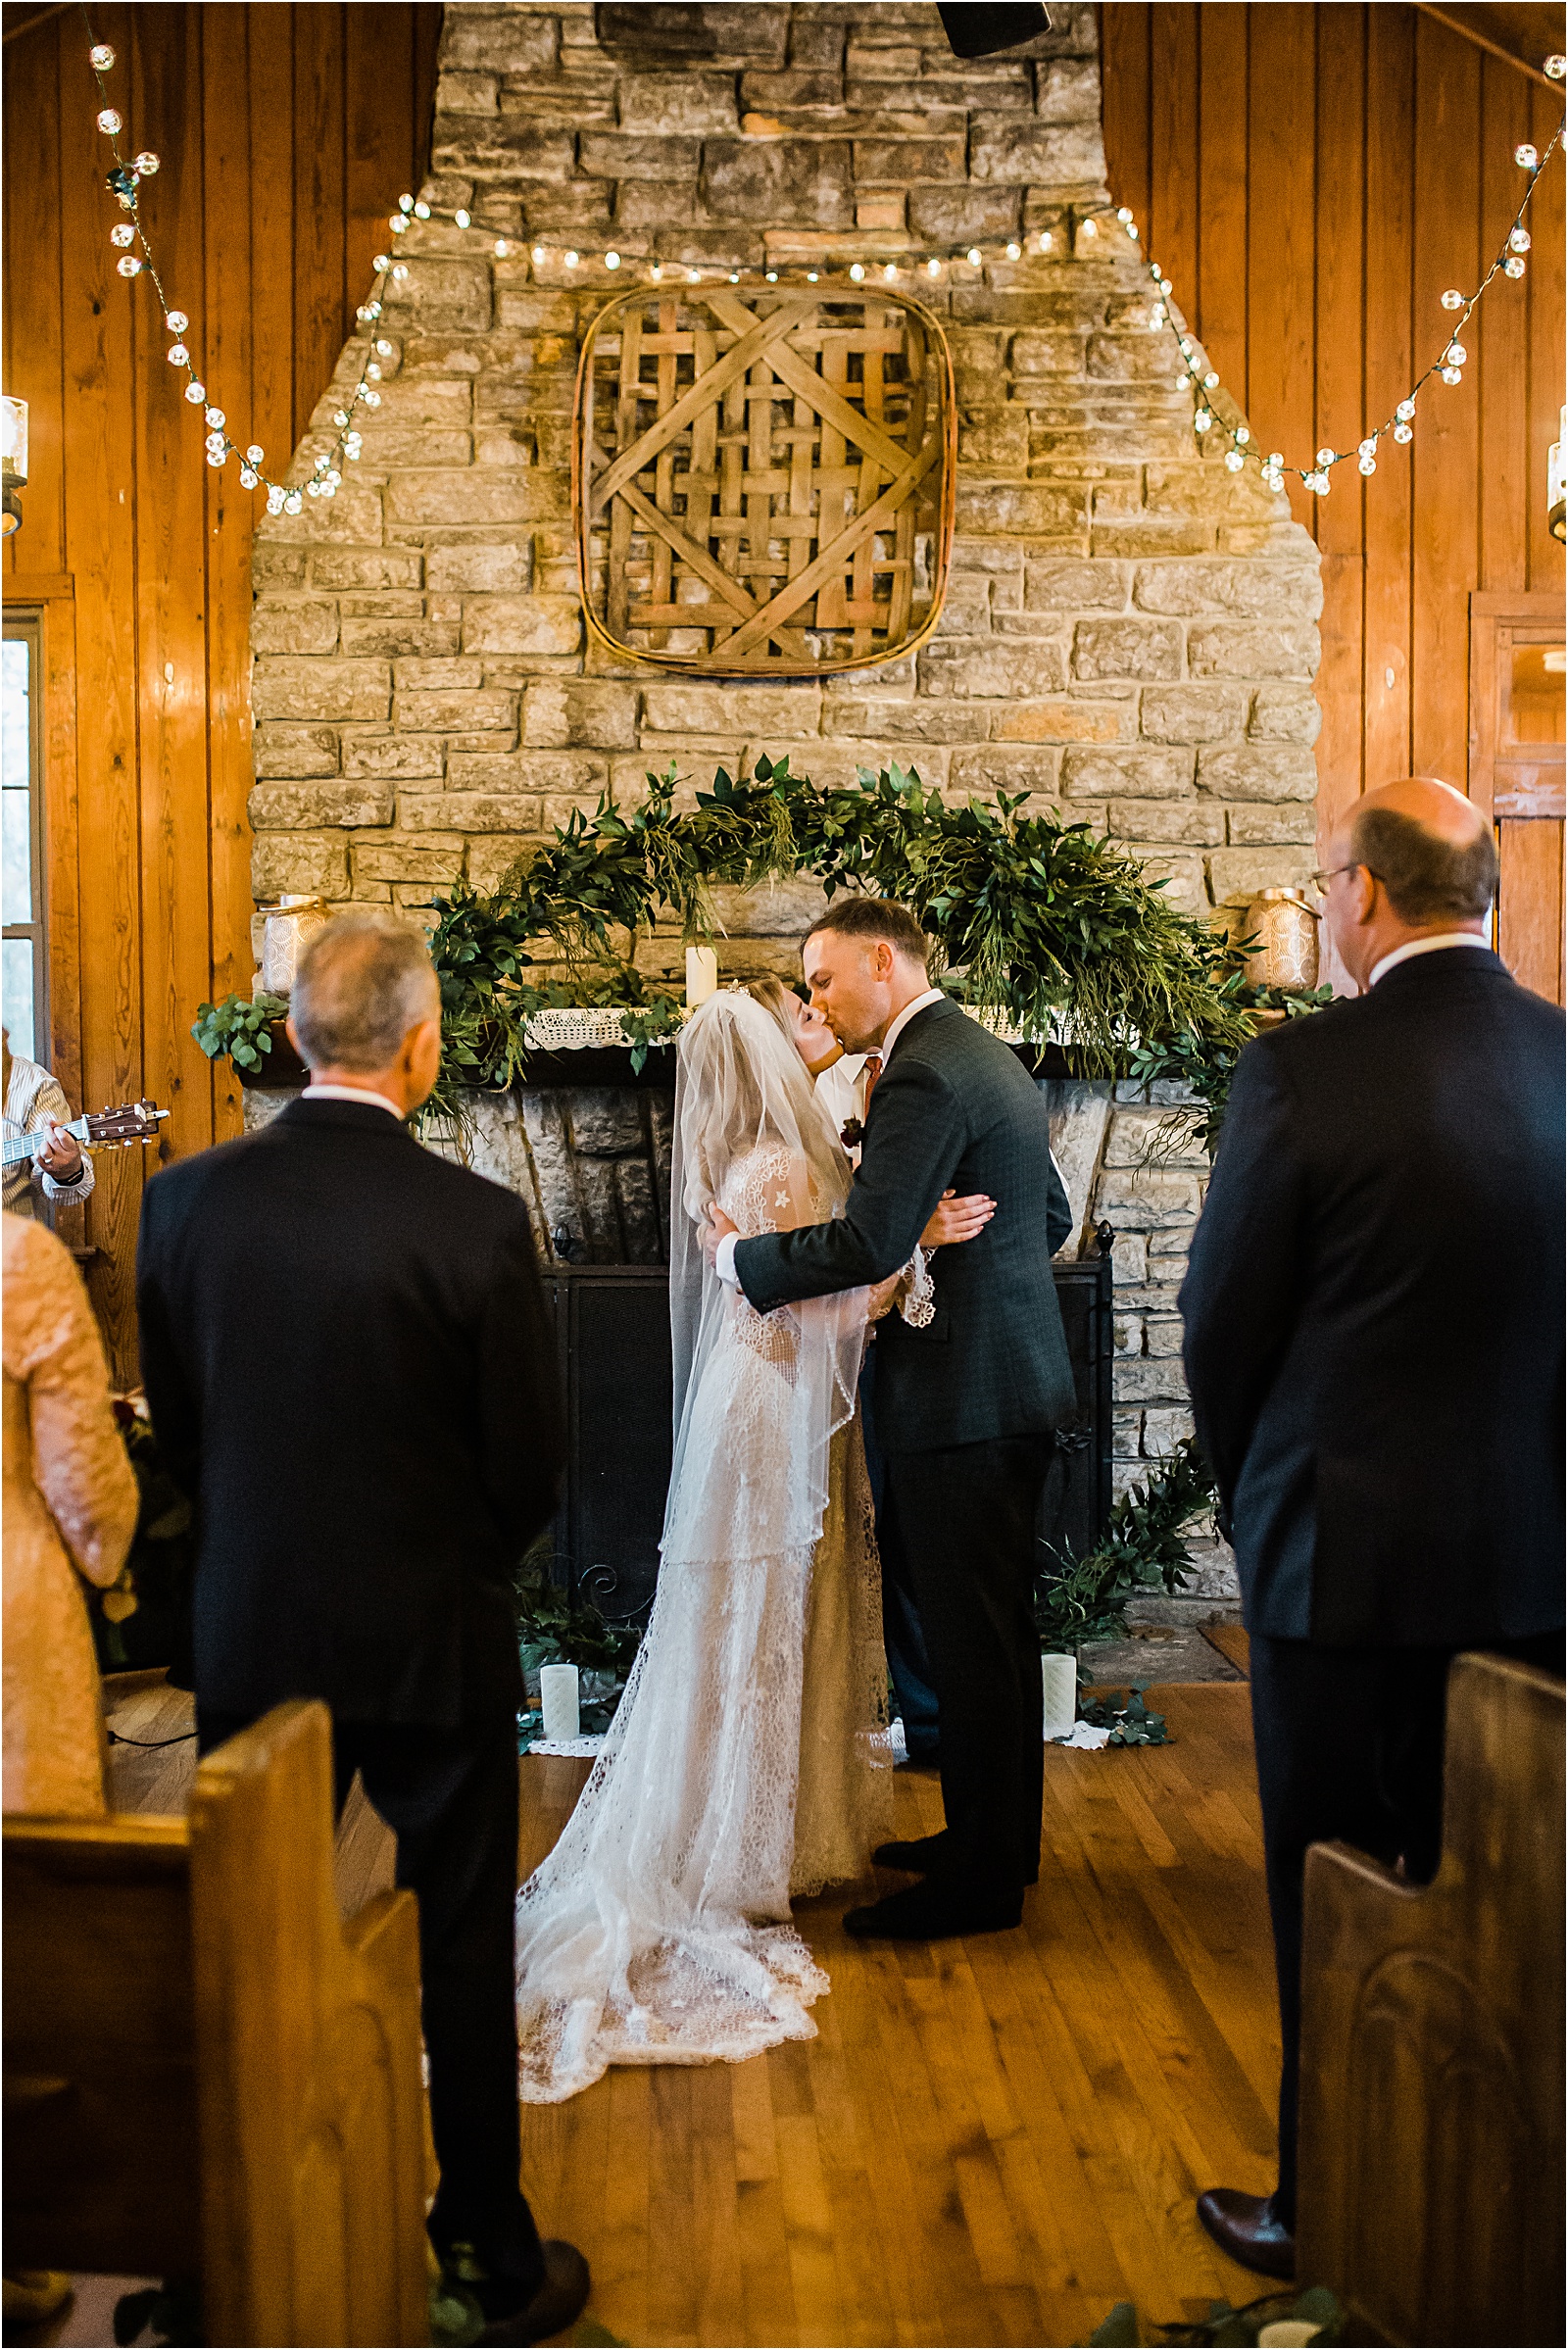 Amber Lowe Photo,B&G Catering,Beauty by Blaire,East Tennessee Wedding Photographer,Fall in Knoxville,Knoxville Wedding Photographer,Mott's Floral,Norris Dam,Norris Tea Room,Tennessee Mountain Home,White Lace and Promises,